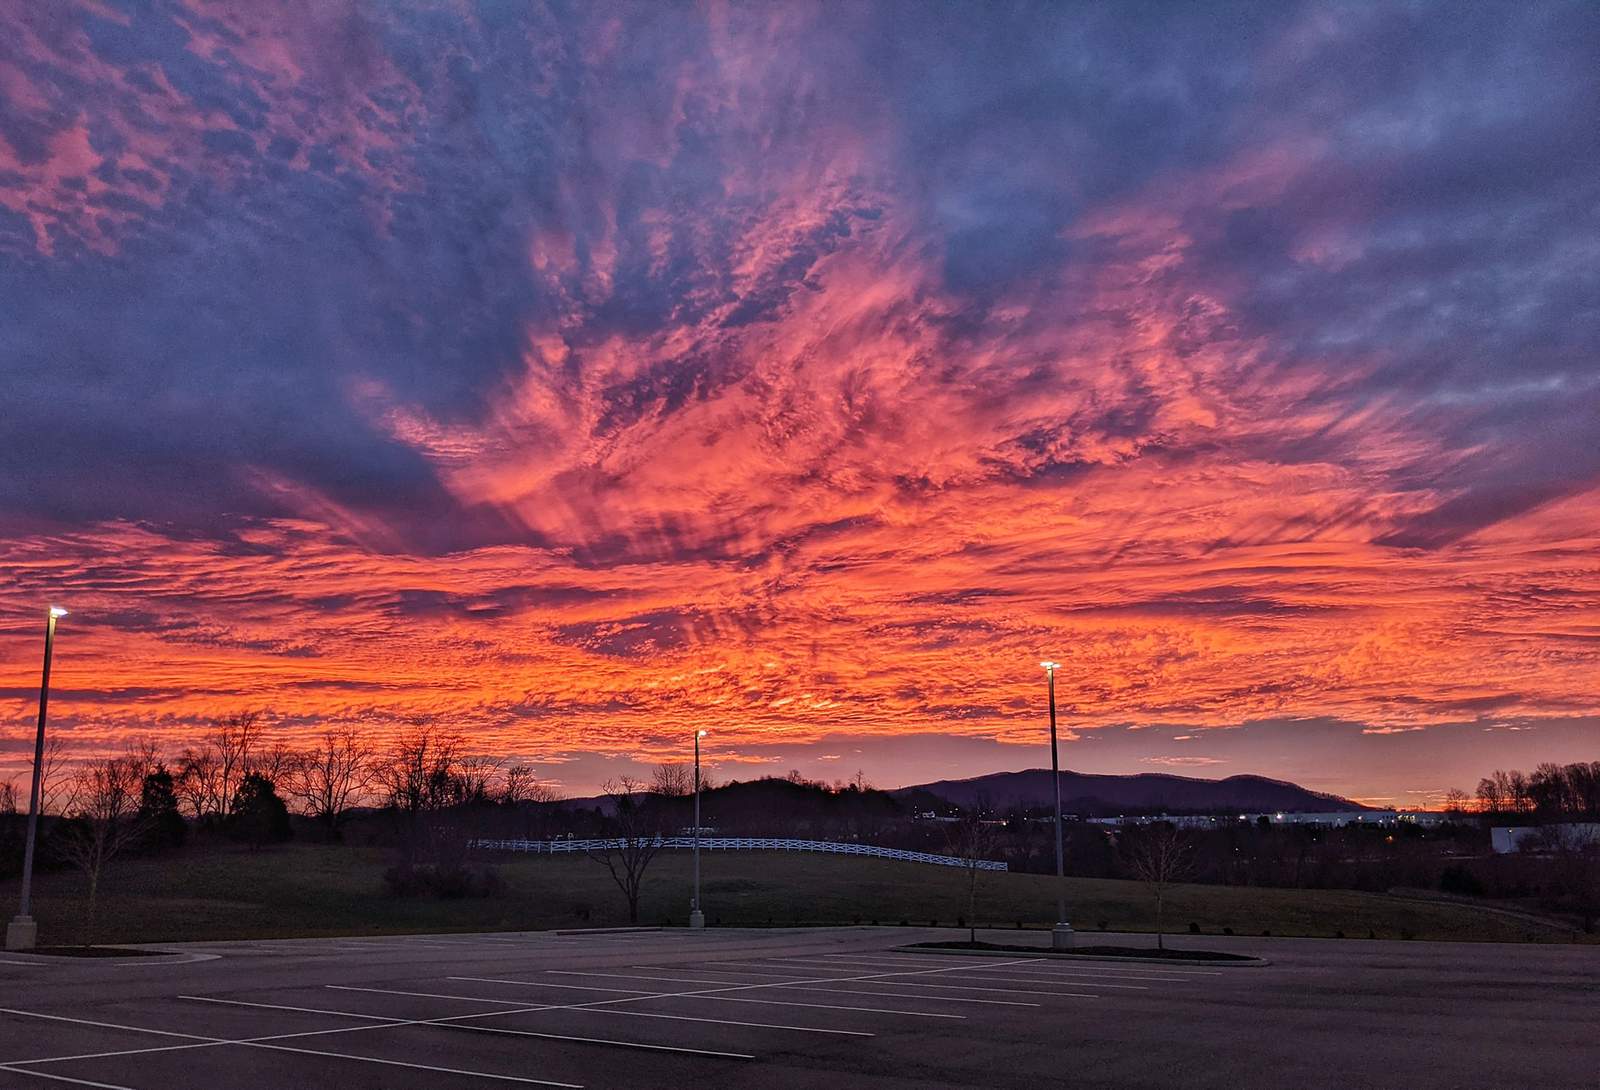 PHOTOS: Wednesday morning starts with a dazzling sunrise across the area